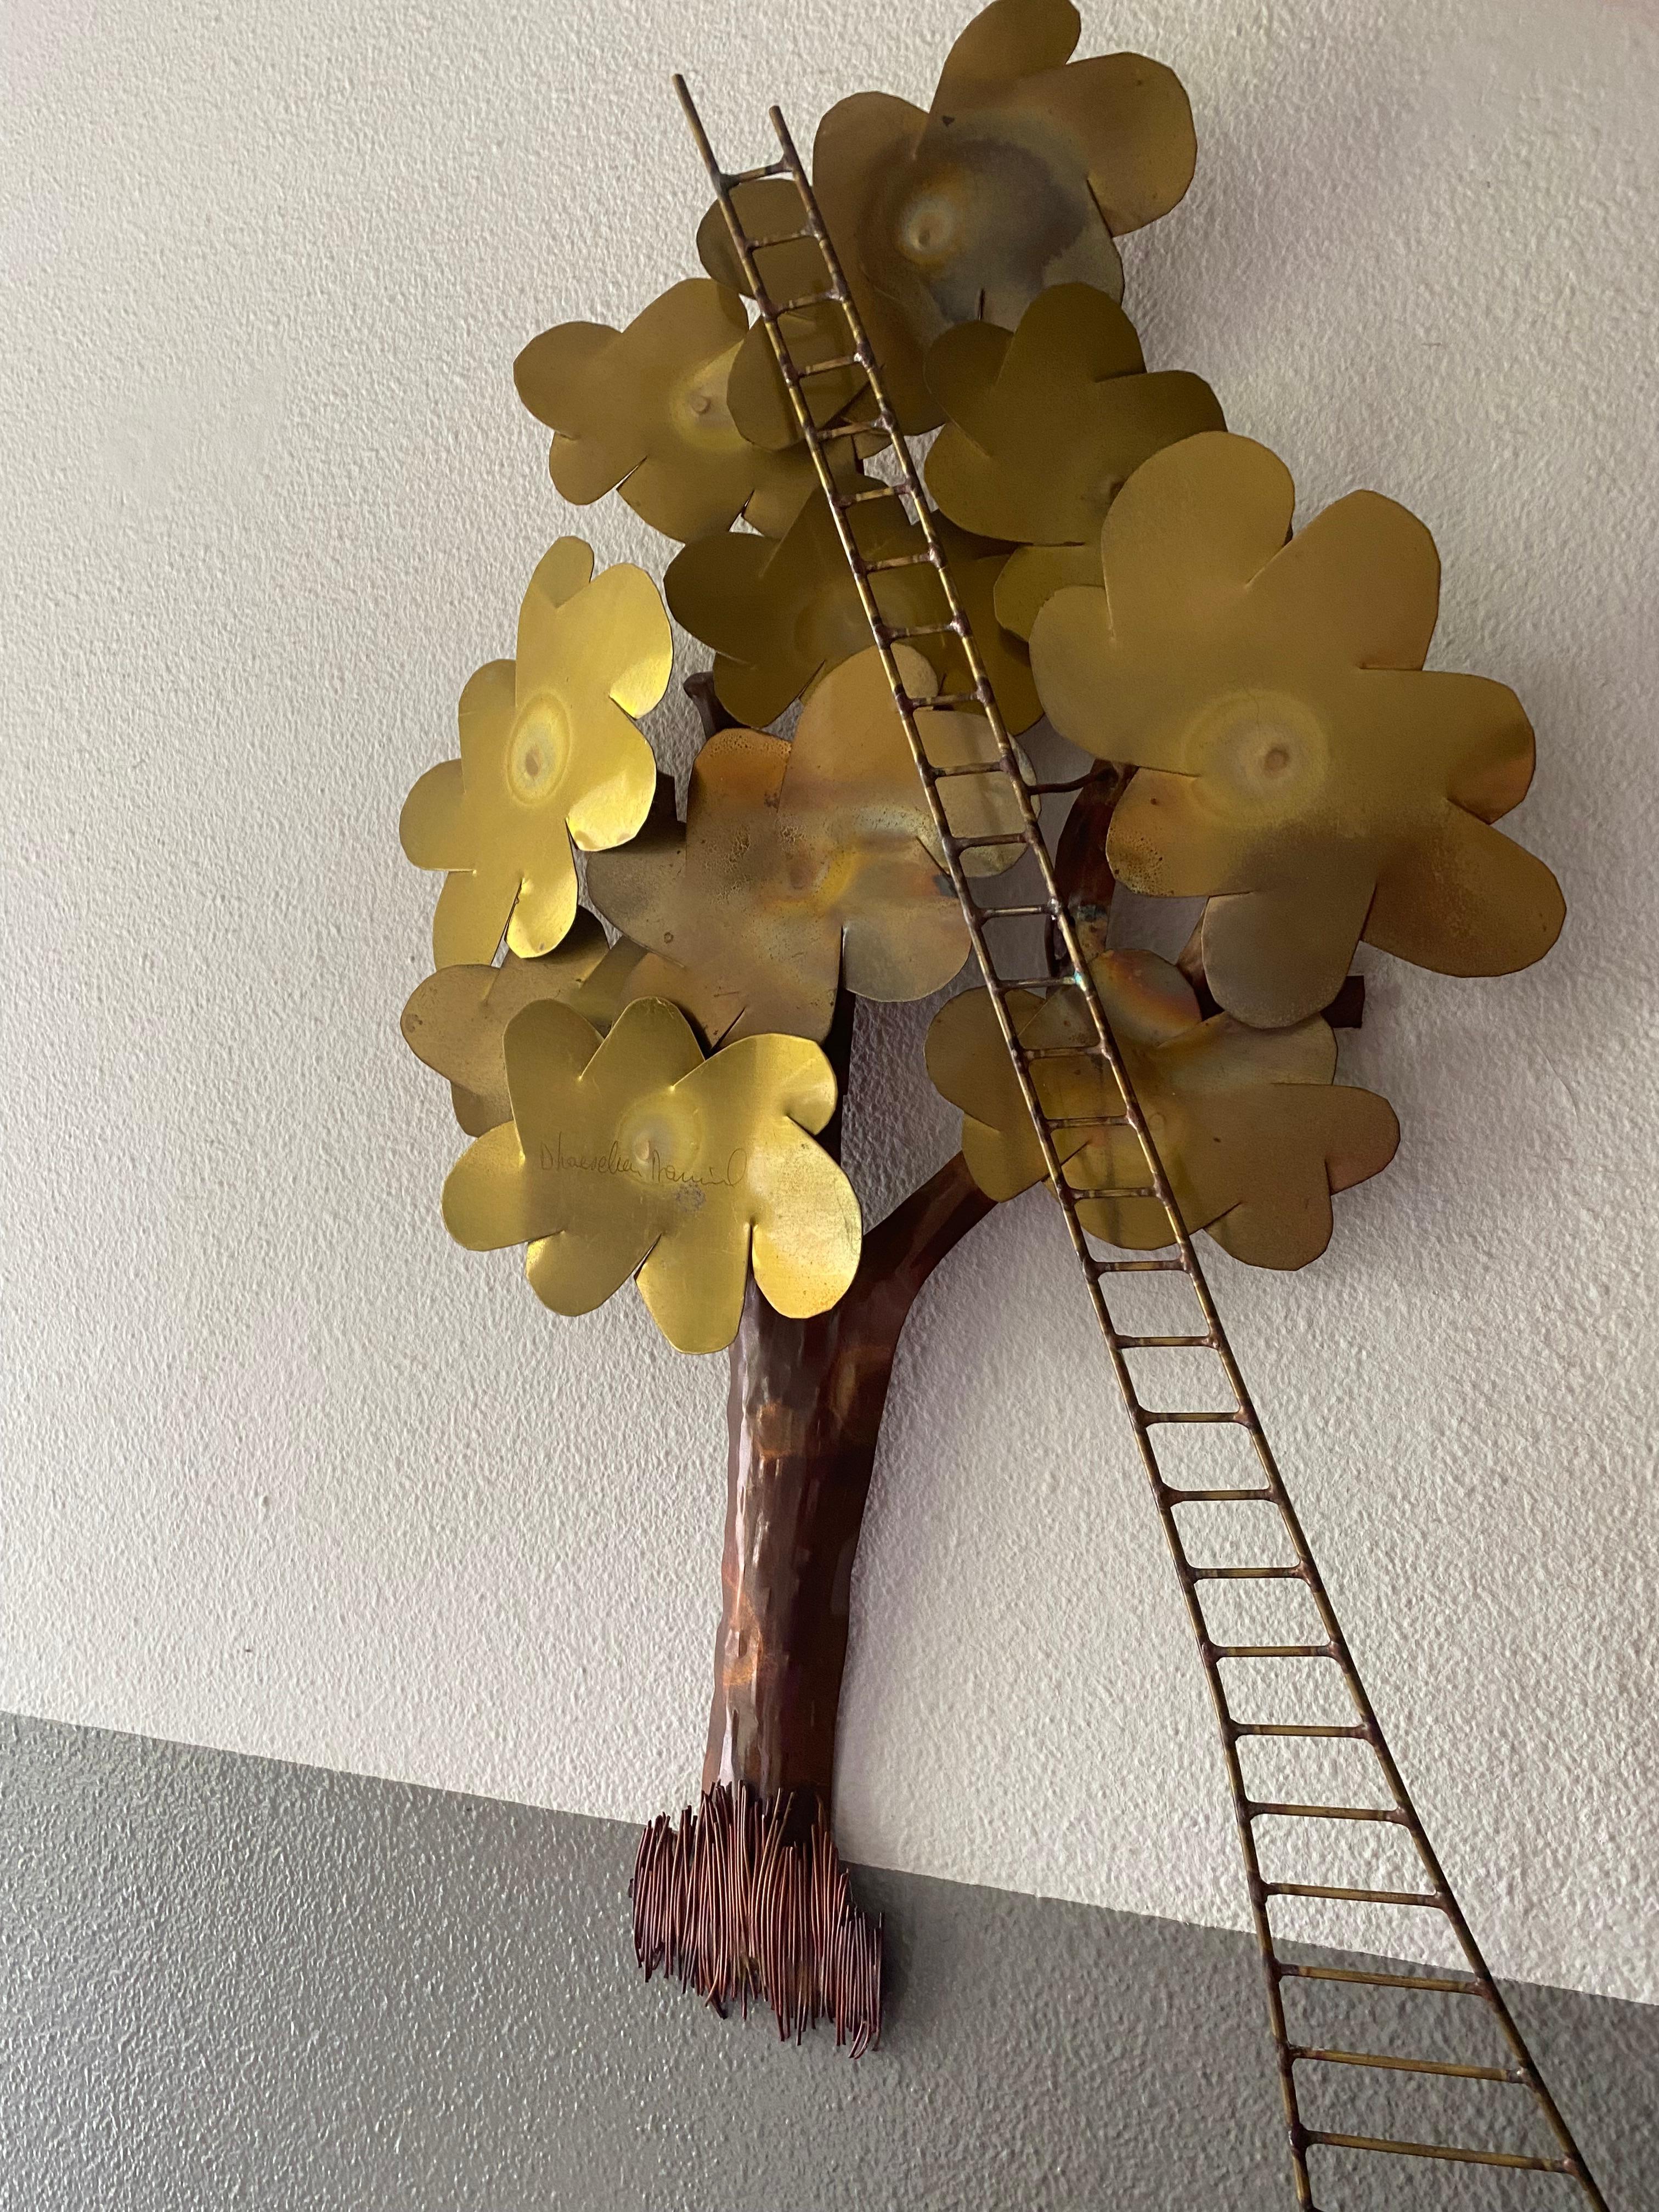 Hand-Crafted Copper Tree Sculpture by Daniel D’haeseleer For Sale